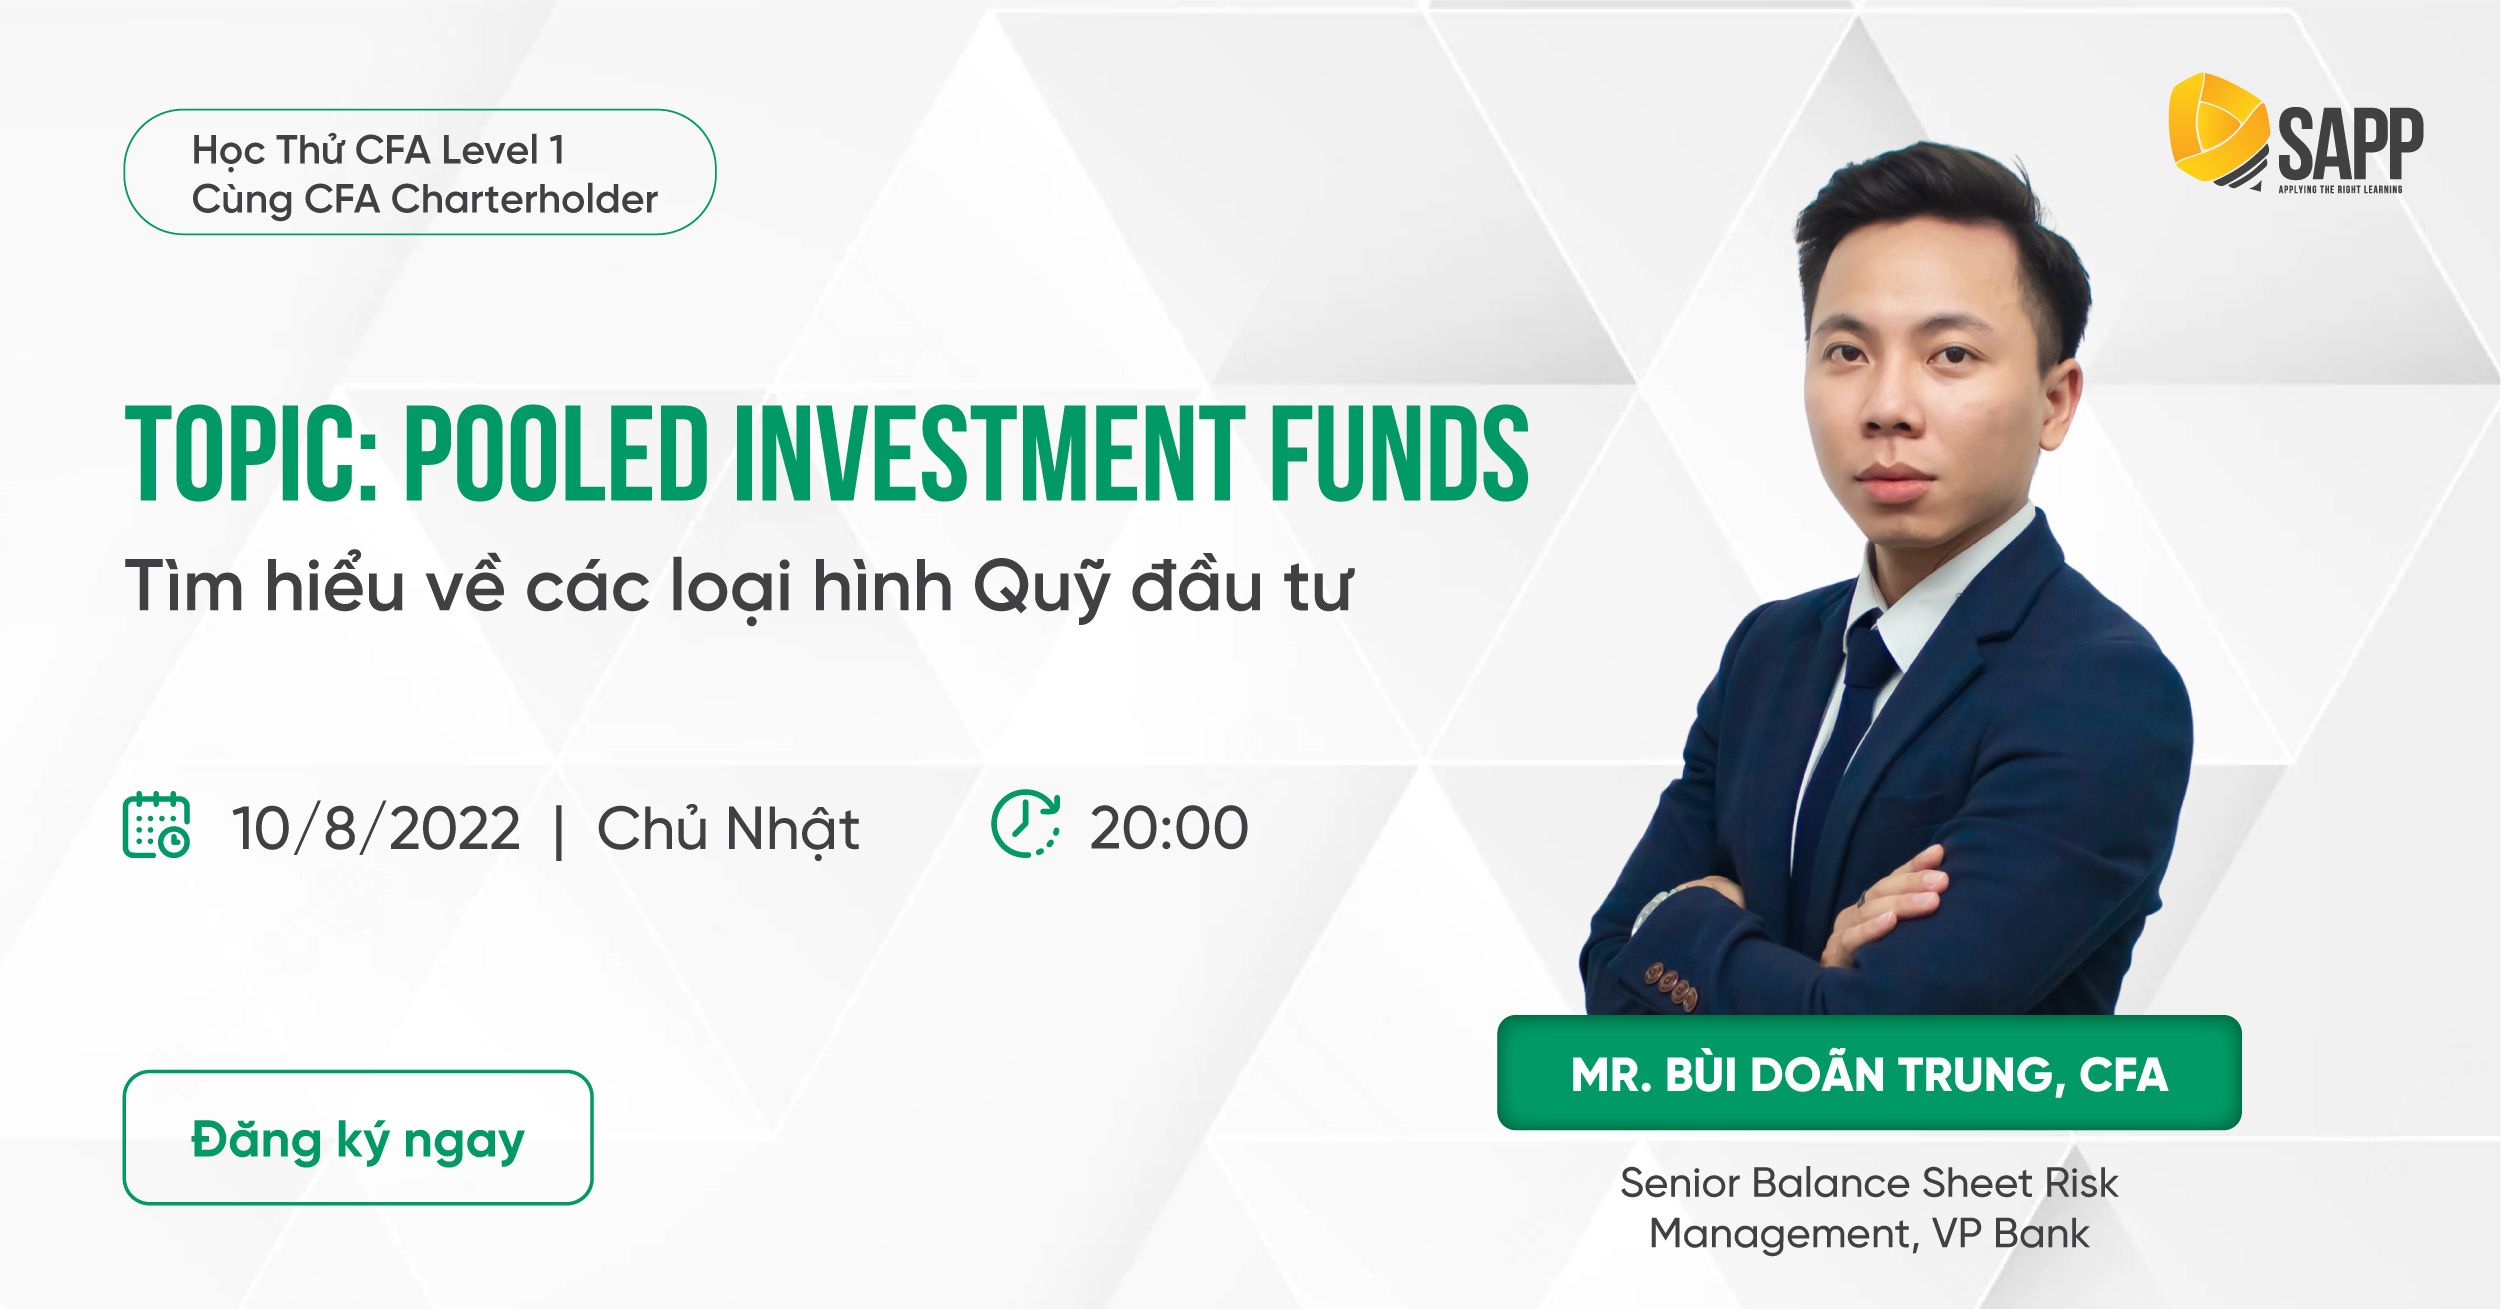 Học Thử CFA Level 1: Pooled Investment Funds